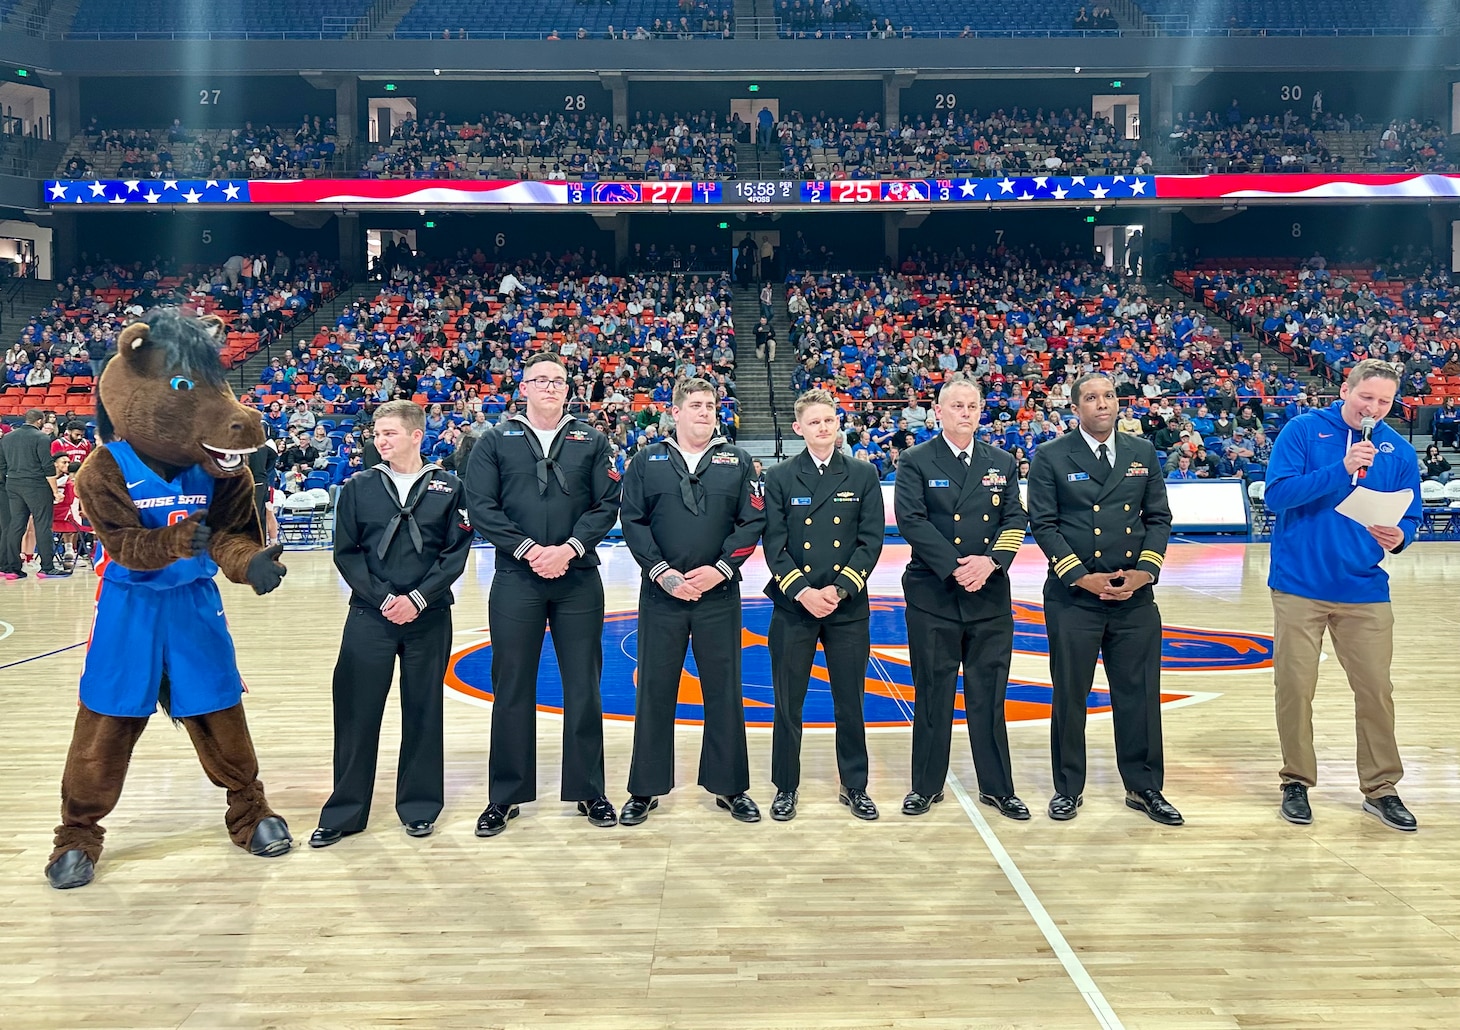 Crewmembers from the future USS Idaho (SSN 799) receive an honors’ welcoming during a Boise State University basketball game in Boise, Idaho, Jan. 24.